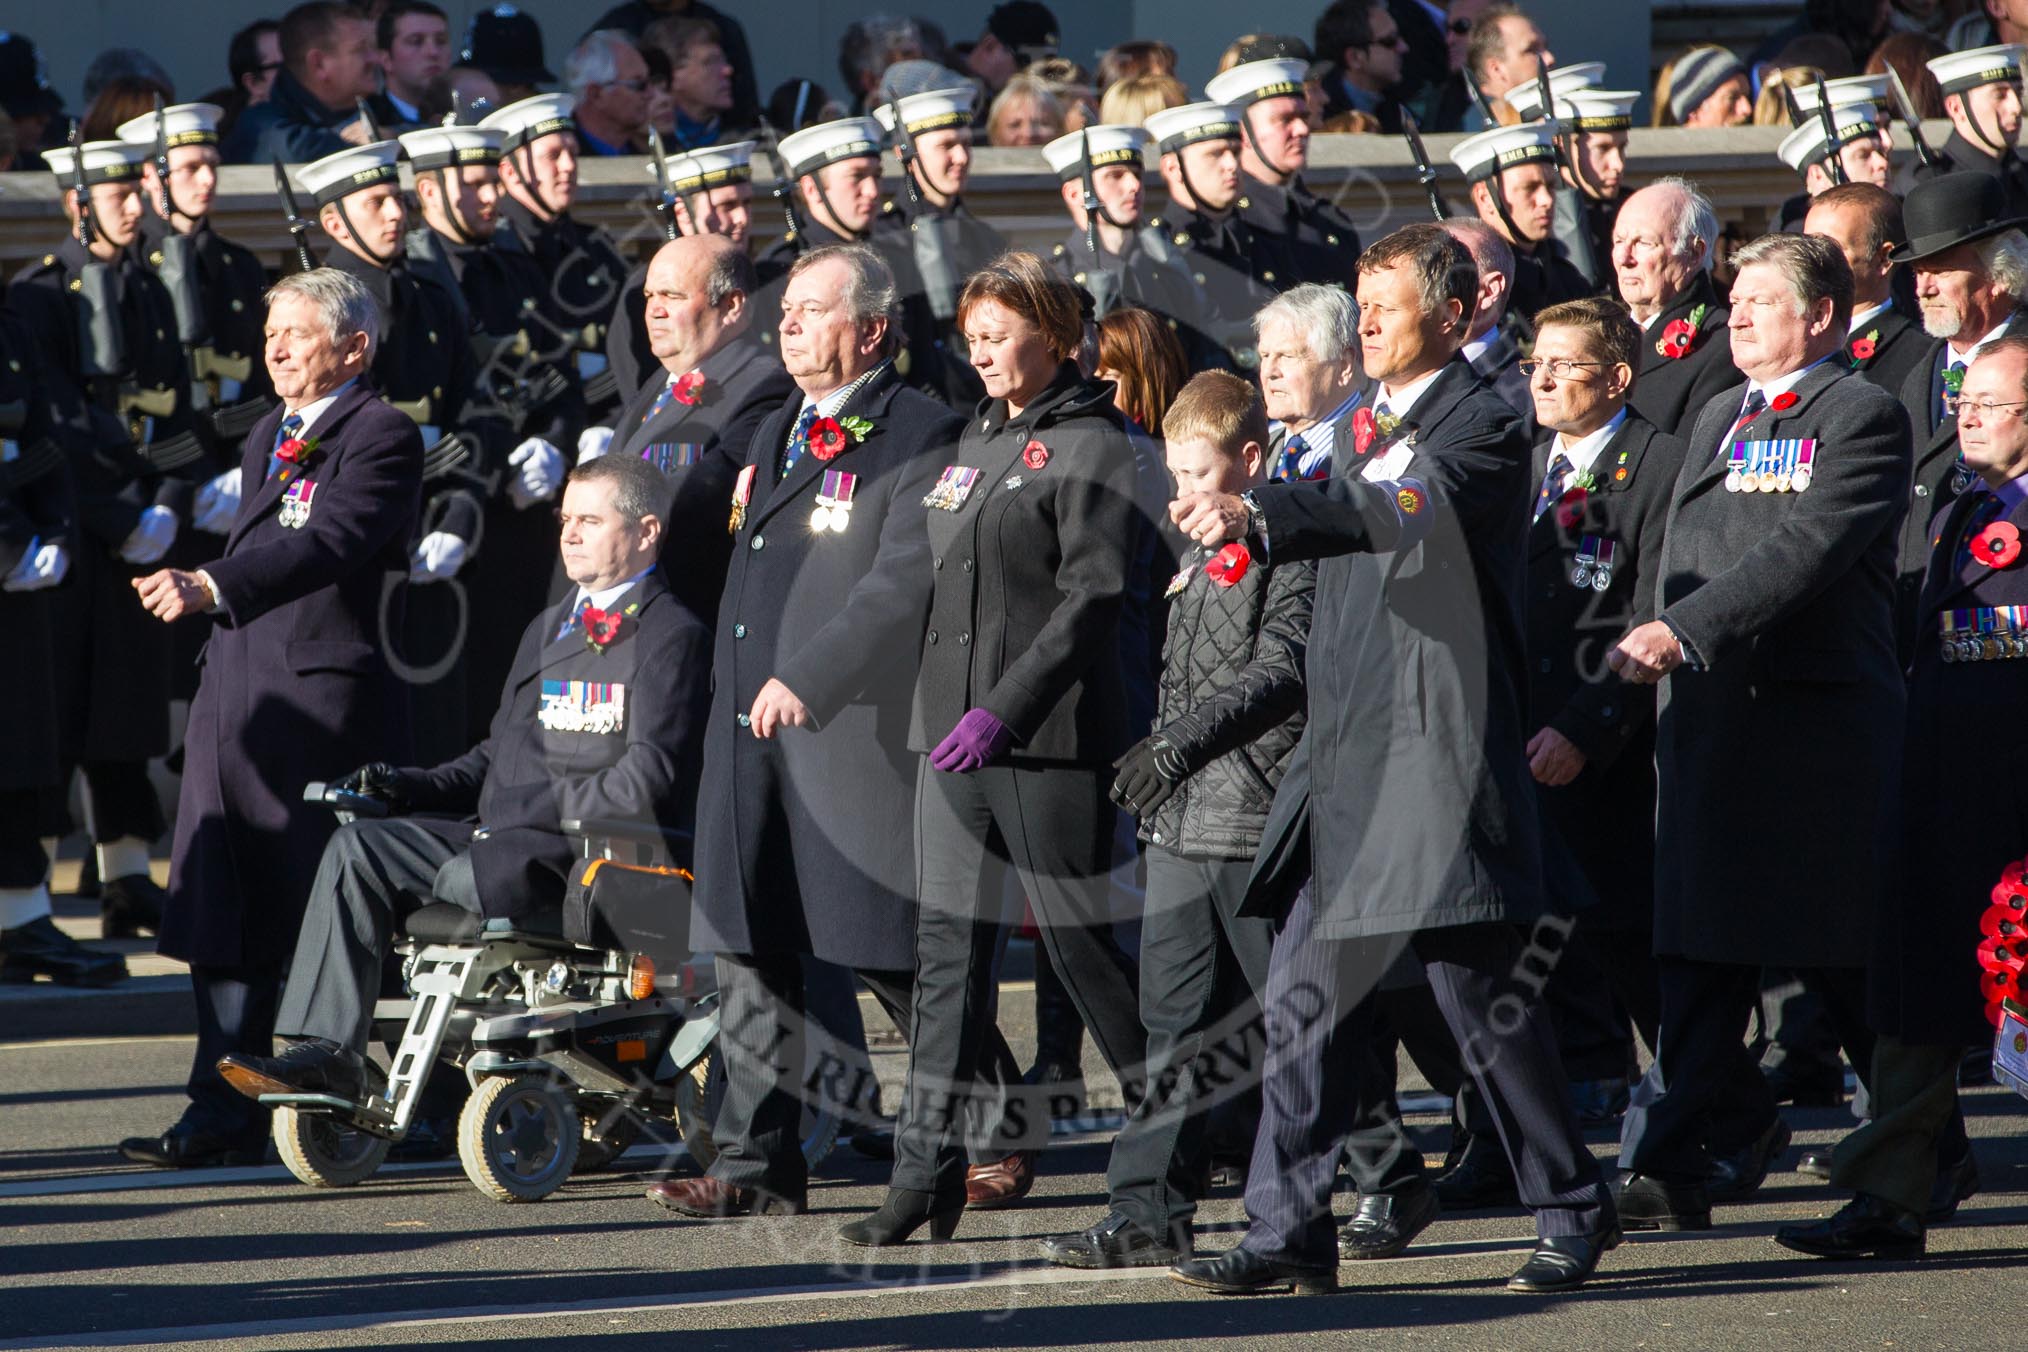 Remembrance Sunday 2012 Cenotaph March Past: Group B18 - Association of Ammunition Technicians..
Whitehall, Cenotaph,
London SW1,

United Kingdom,
on 11 November 2012 at 11:57, image #926